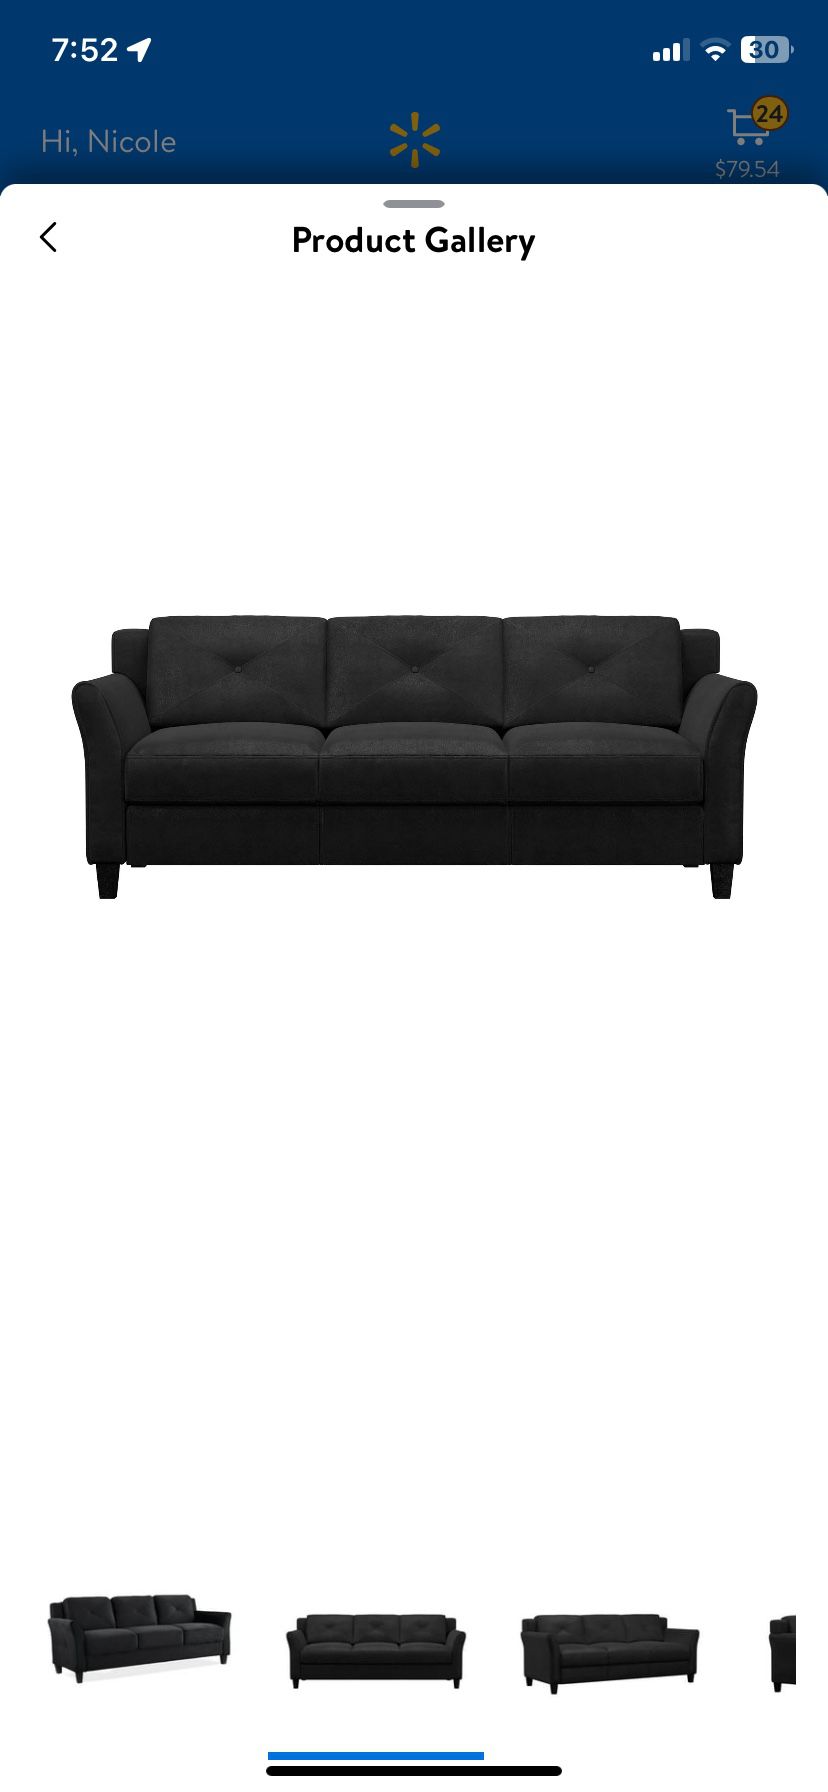 Lifestyle Solutions Taryn Curved Arms Sofa, Black Fabric